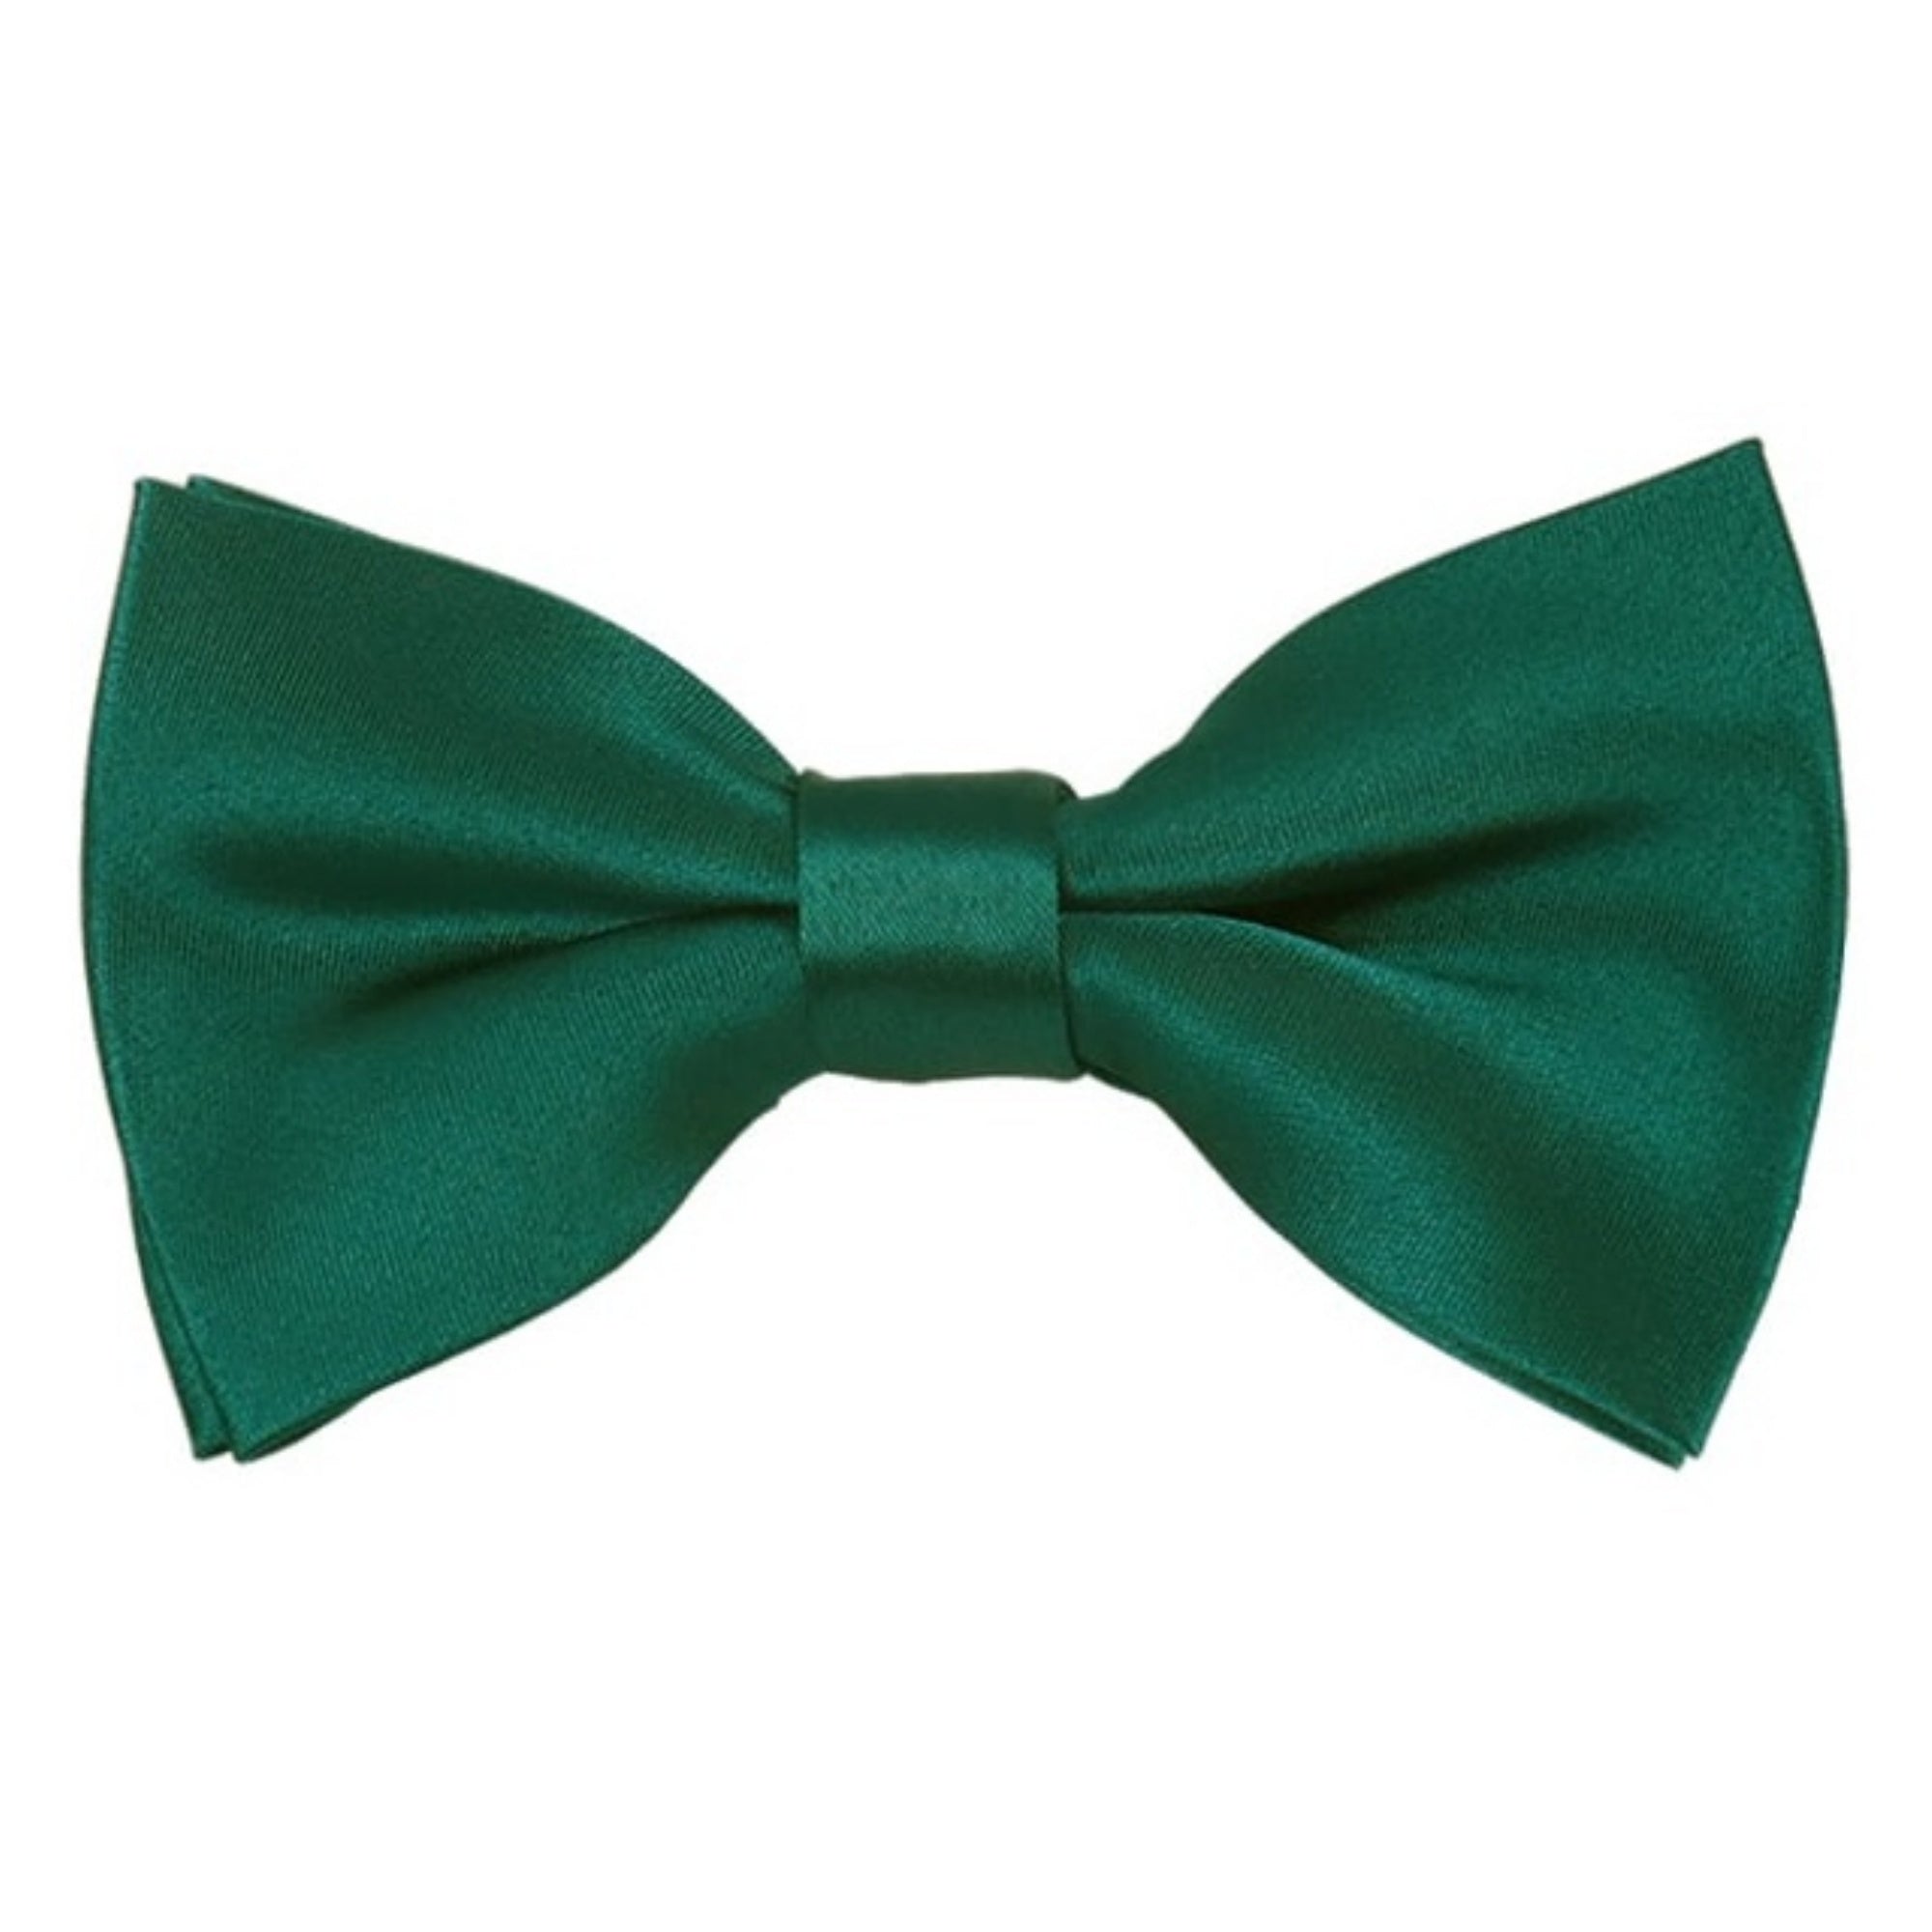 TheDapperTie Men's Solid Color 2.5 W And 4.5 L Inch Pre-Tied adjustable Bow Ties Men's Solid Color Bow Tie TheDapperTie Teal Green  